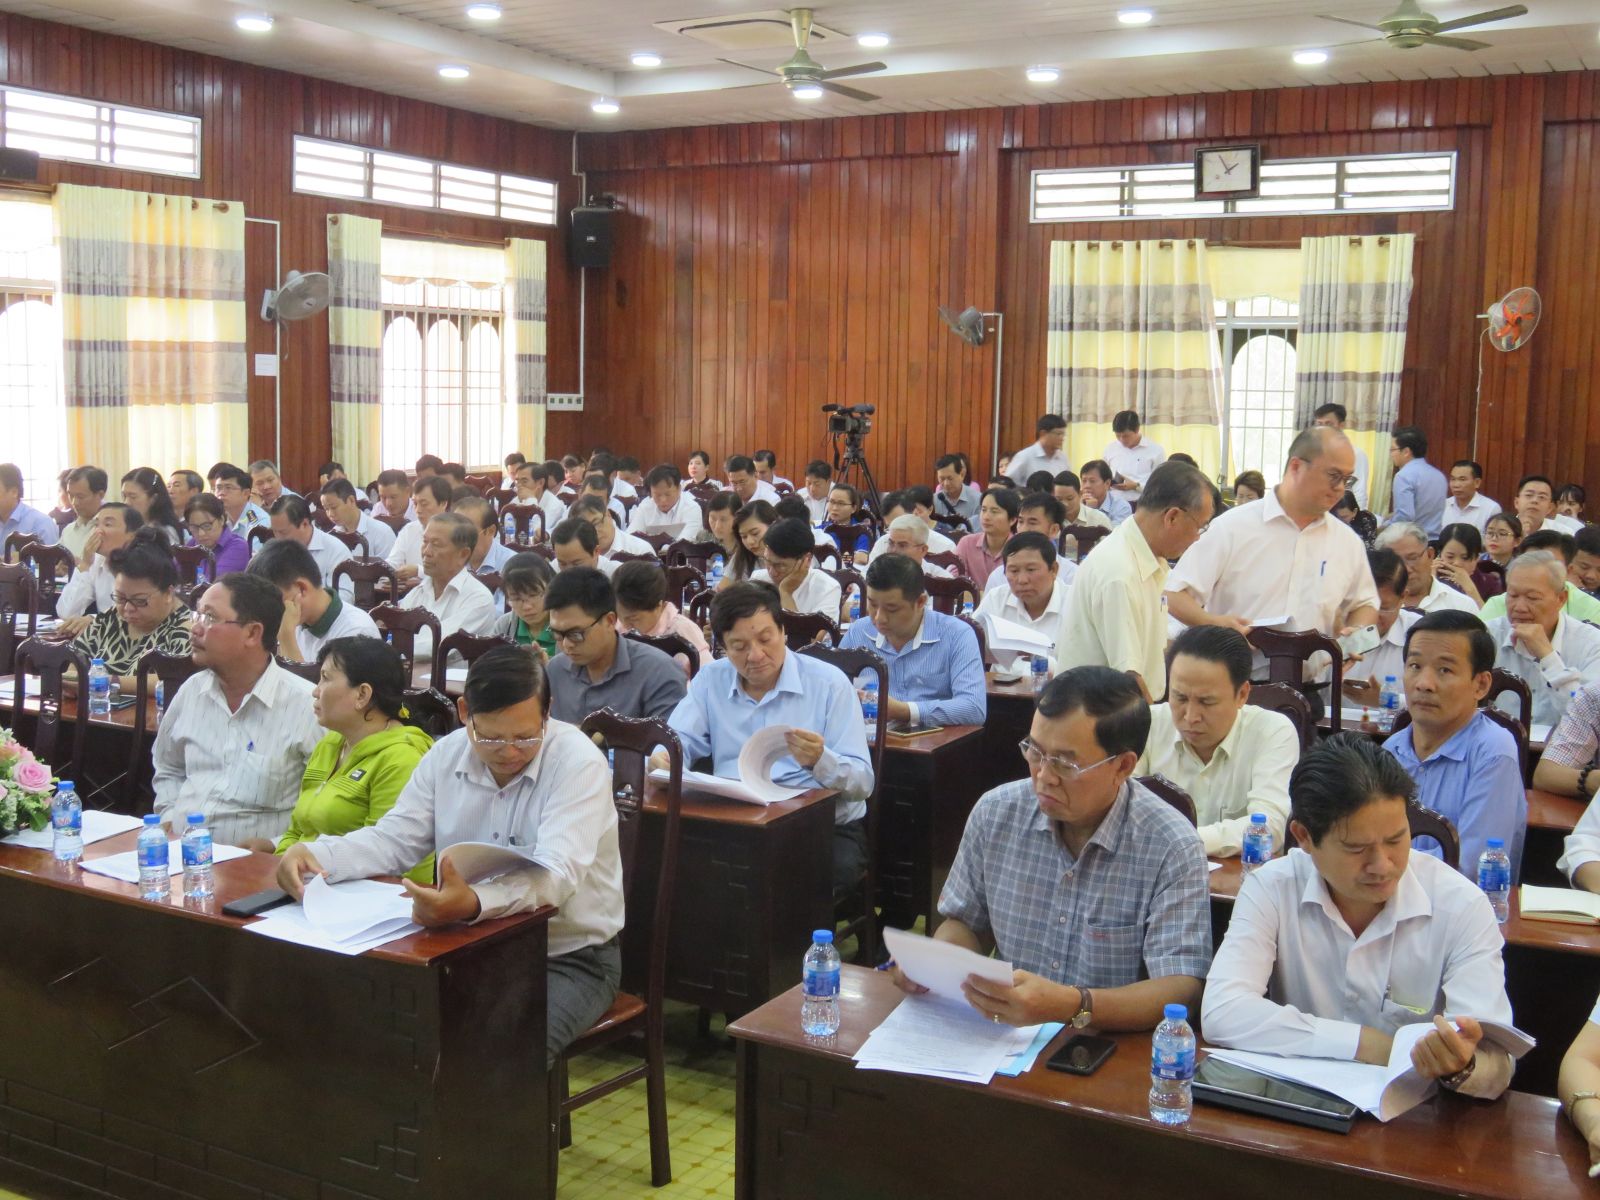 Enterprises, leaders of some departments, provincial departments and district People's Committees of Ben Luc, Can Duoc and Can Giuoc attend dialogues